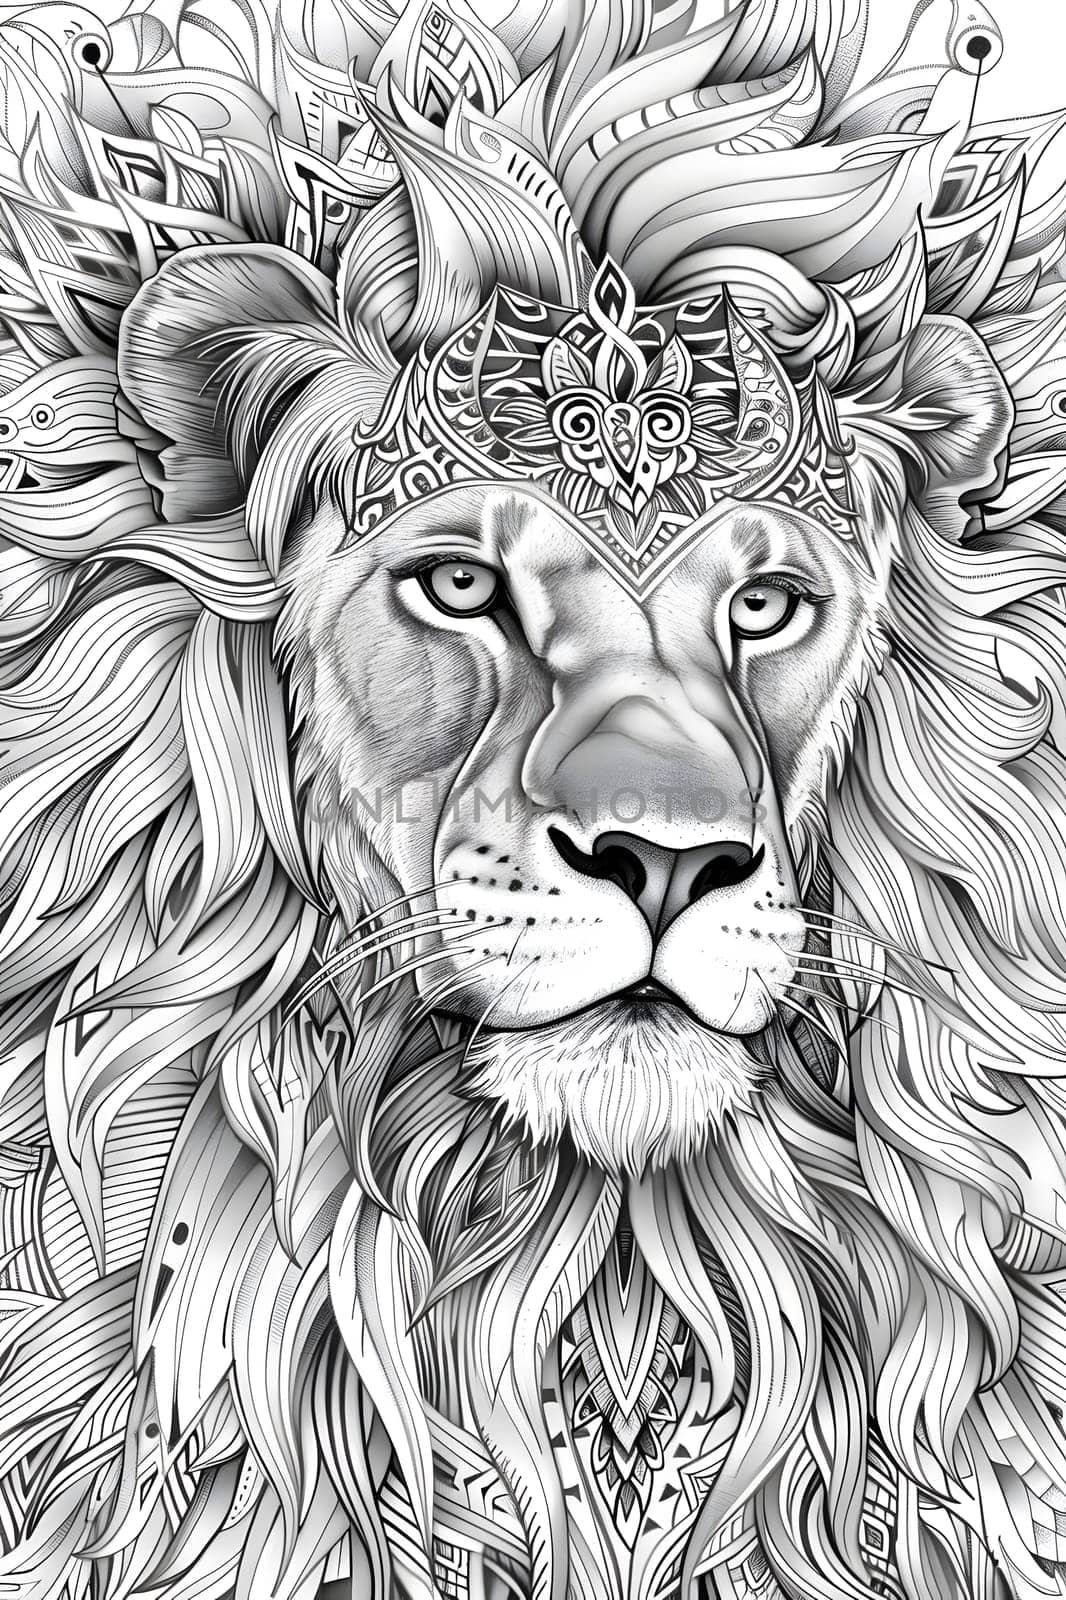 A grayscale drawing of a Felidae Carnivore, the Masai lion, with a crown on its head. This art style captures the majesty of big cats in a unique font painting